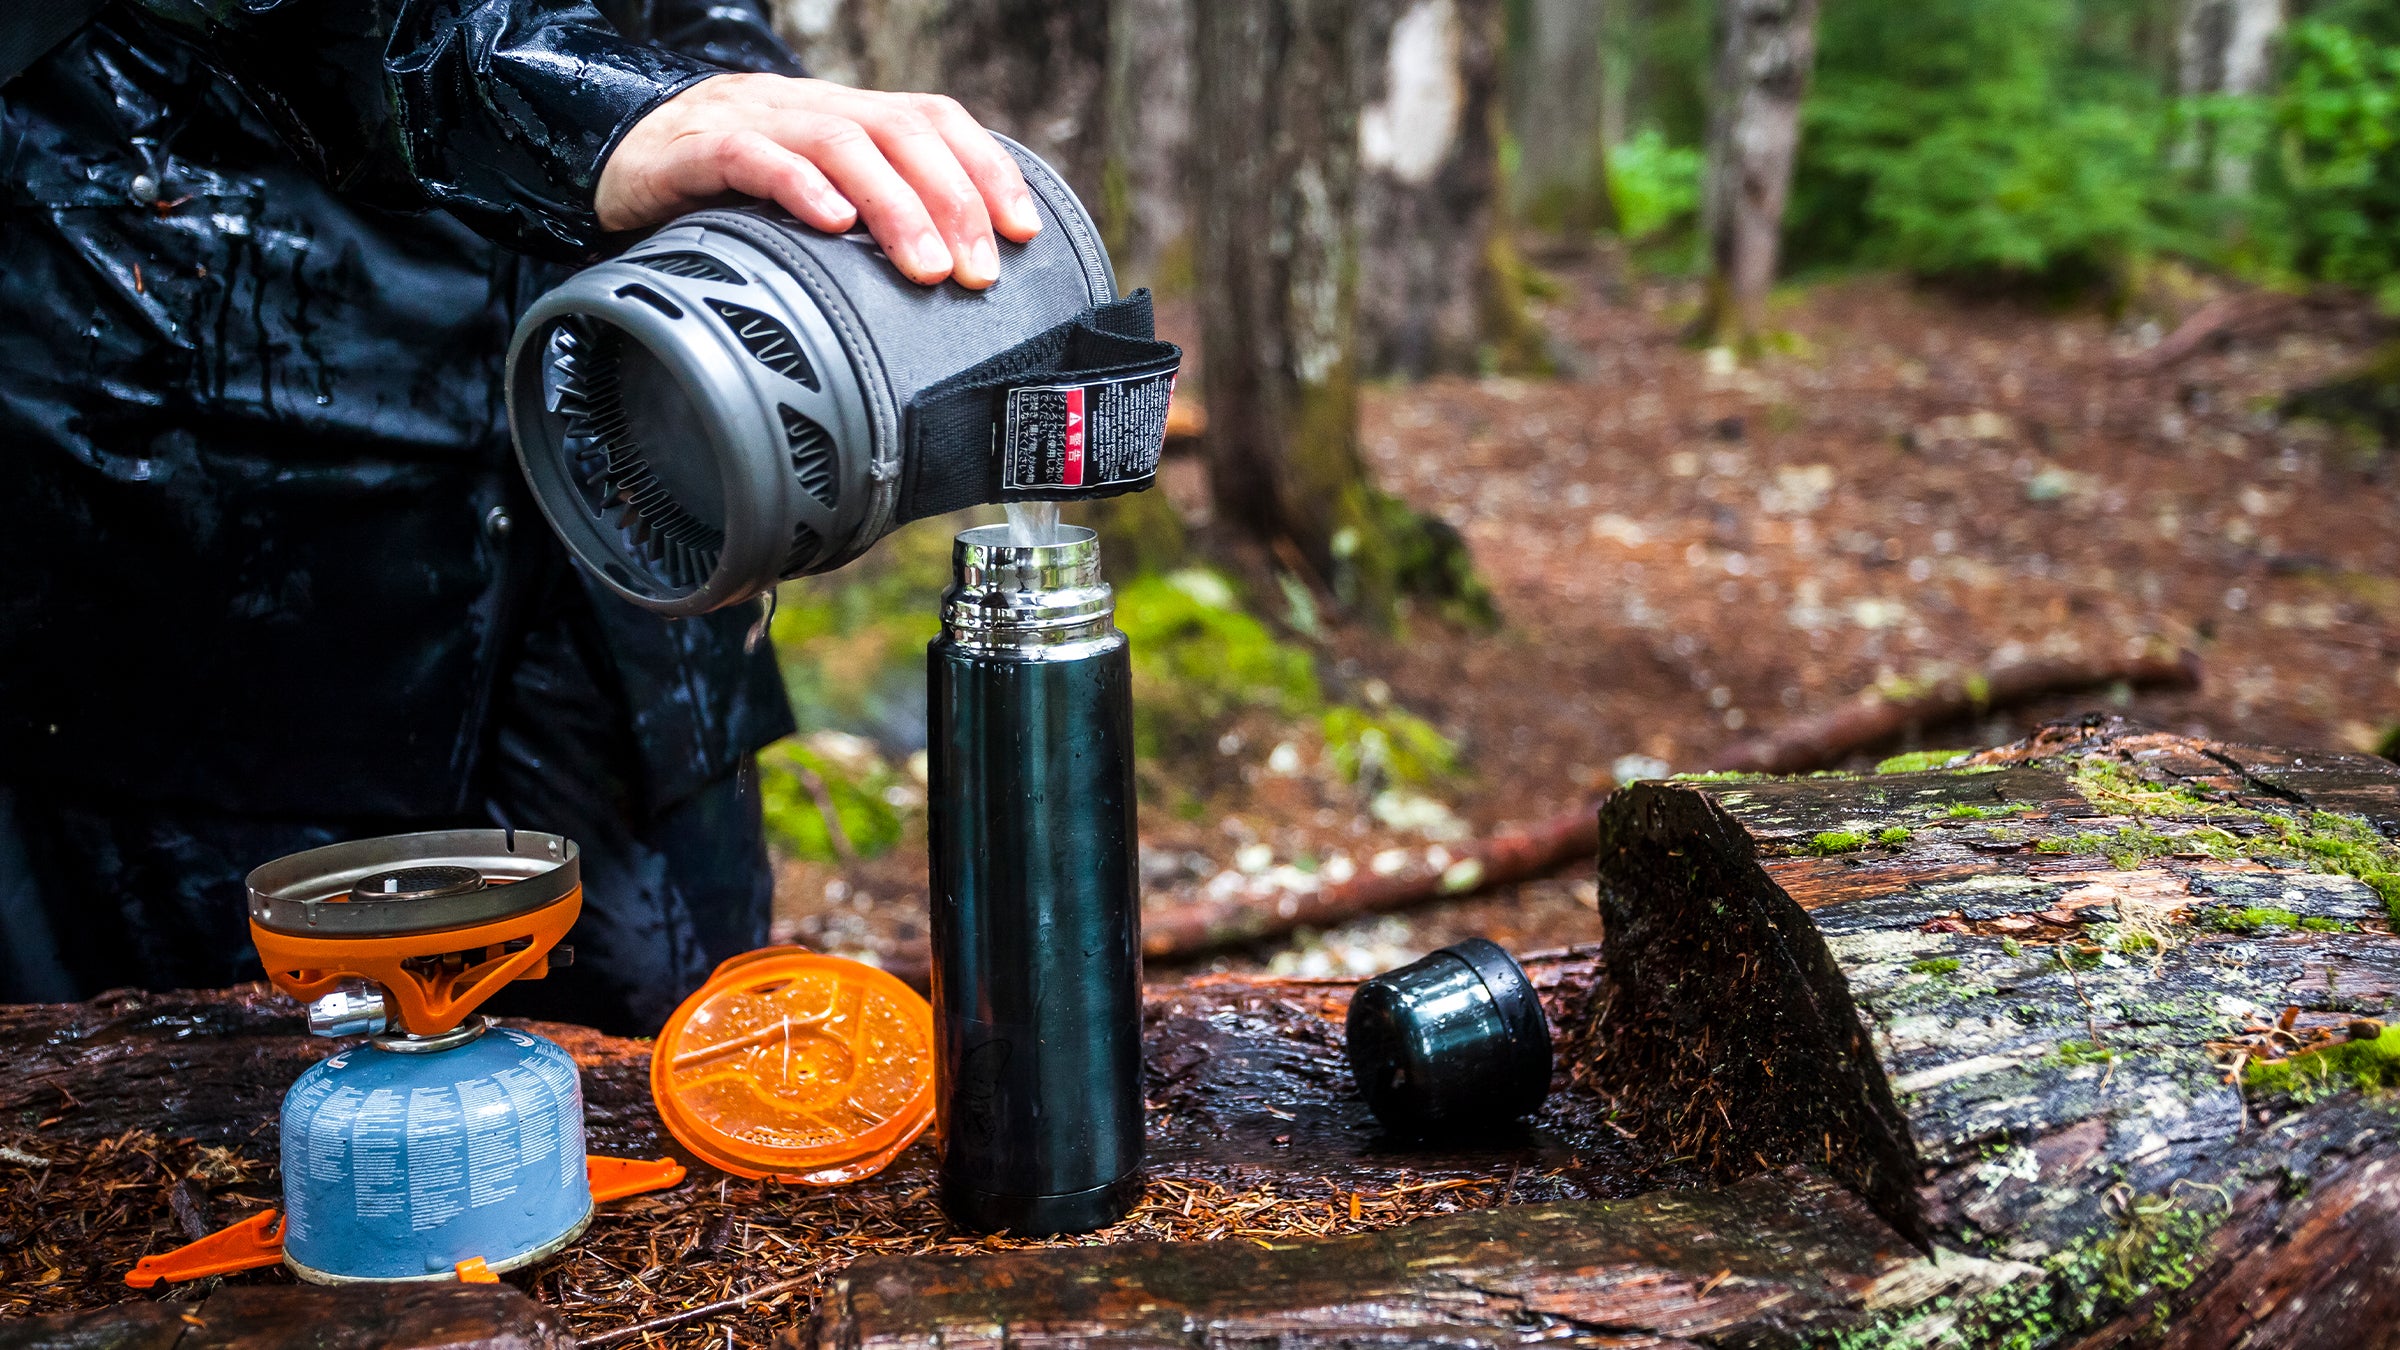 https://cdn.outsideonline.com/wp-content/uploads/2020/11/25/thermos-woods-howto_h.jpg